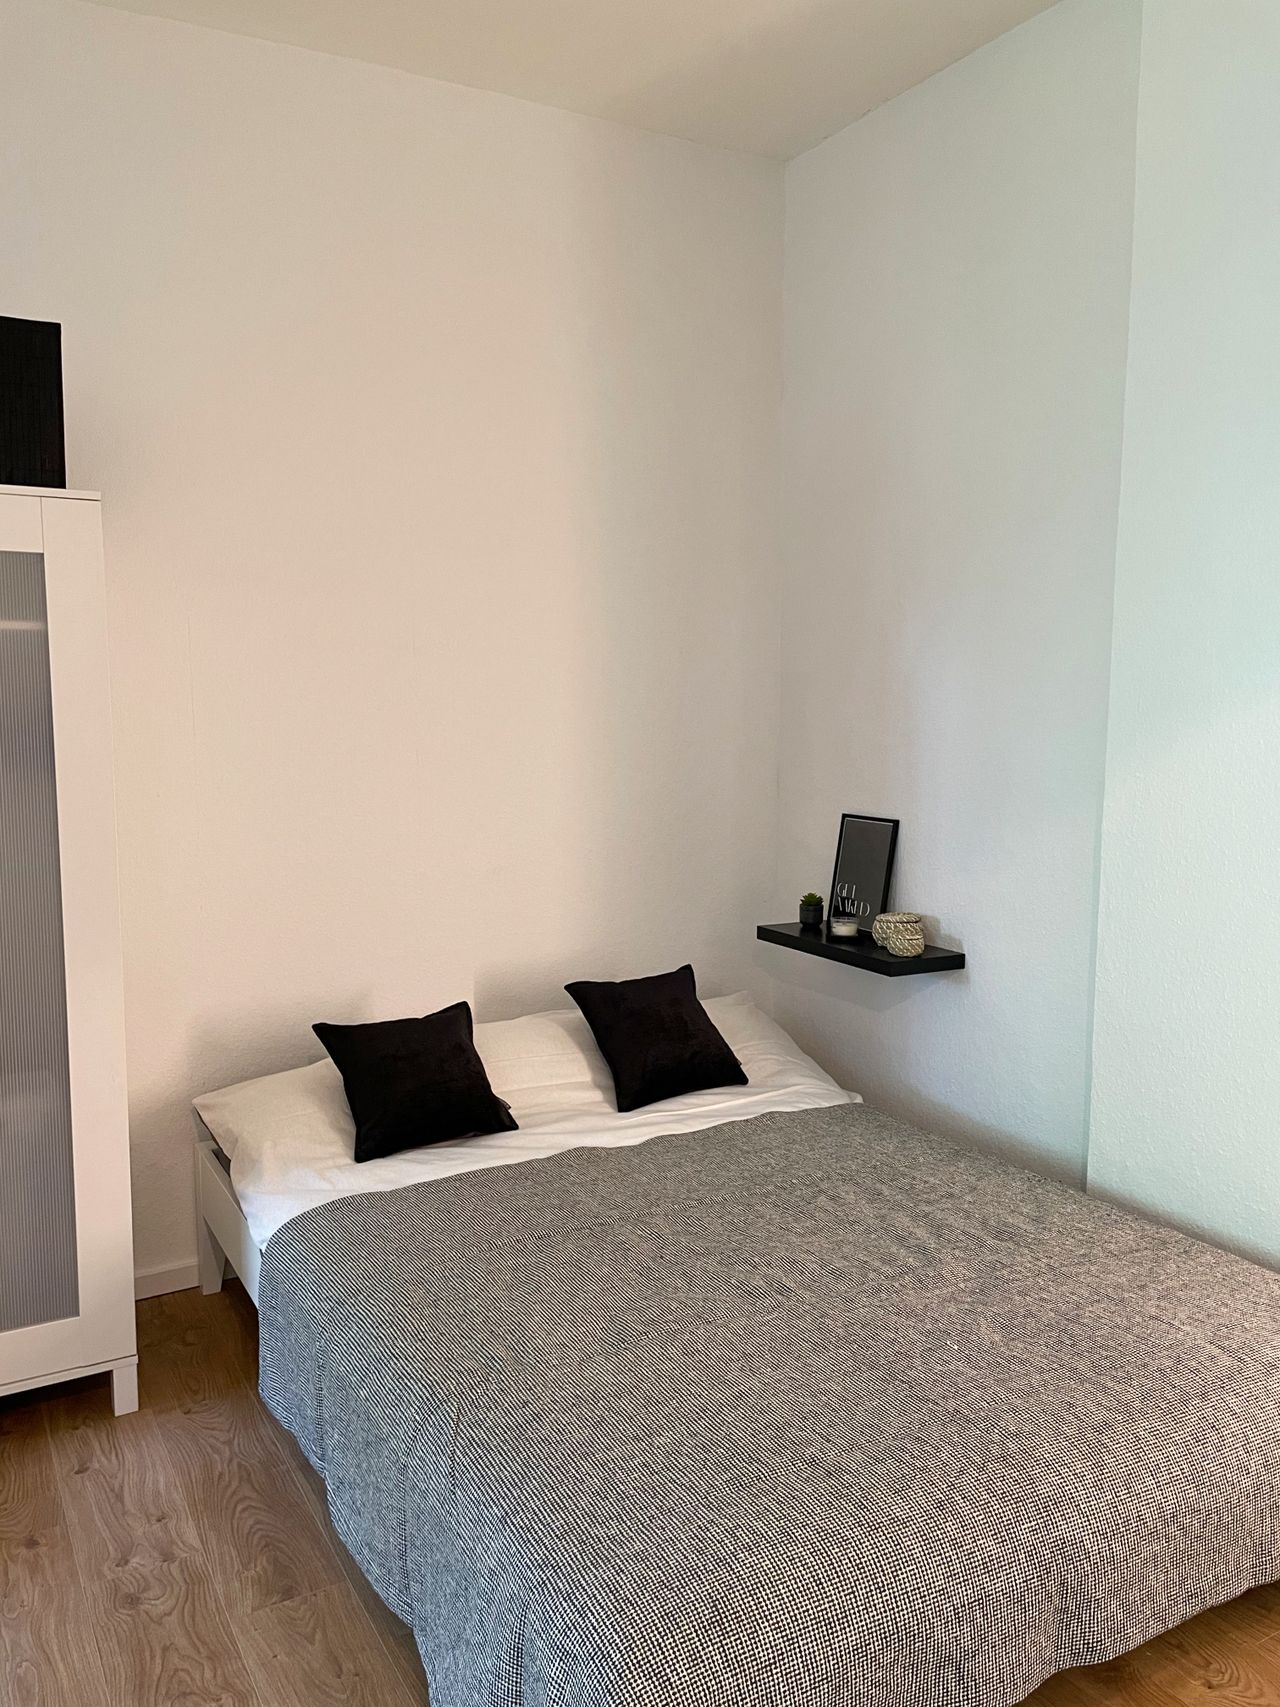 Fantastic studio apartment in the center of Duisburg Neudorf with Wifi and Netflix